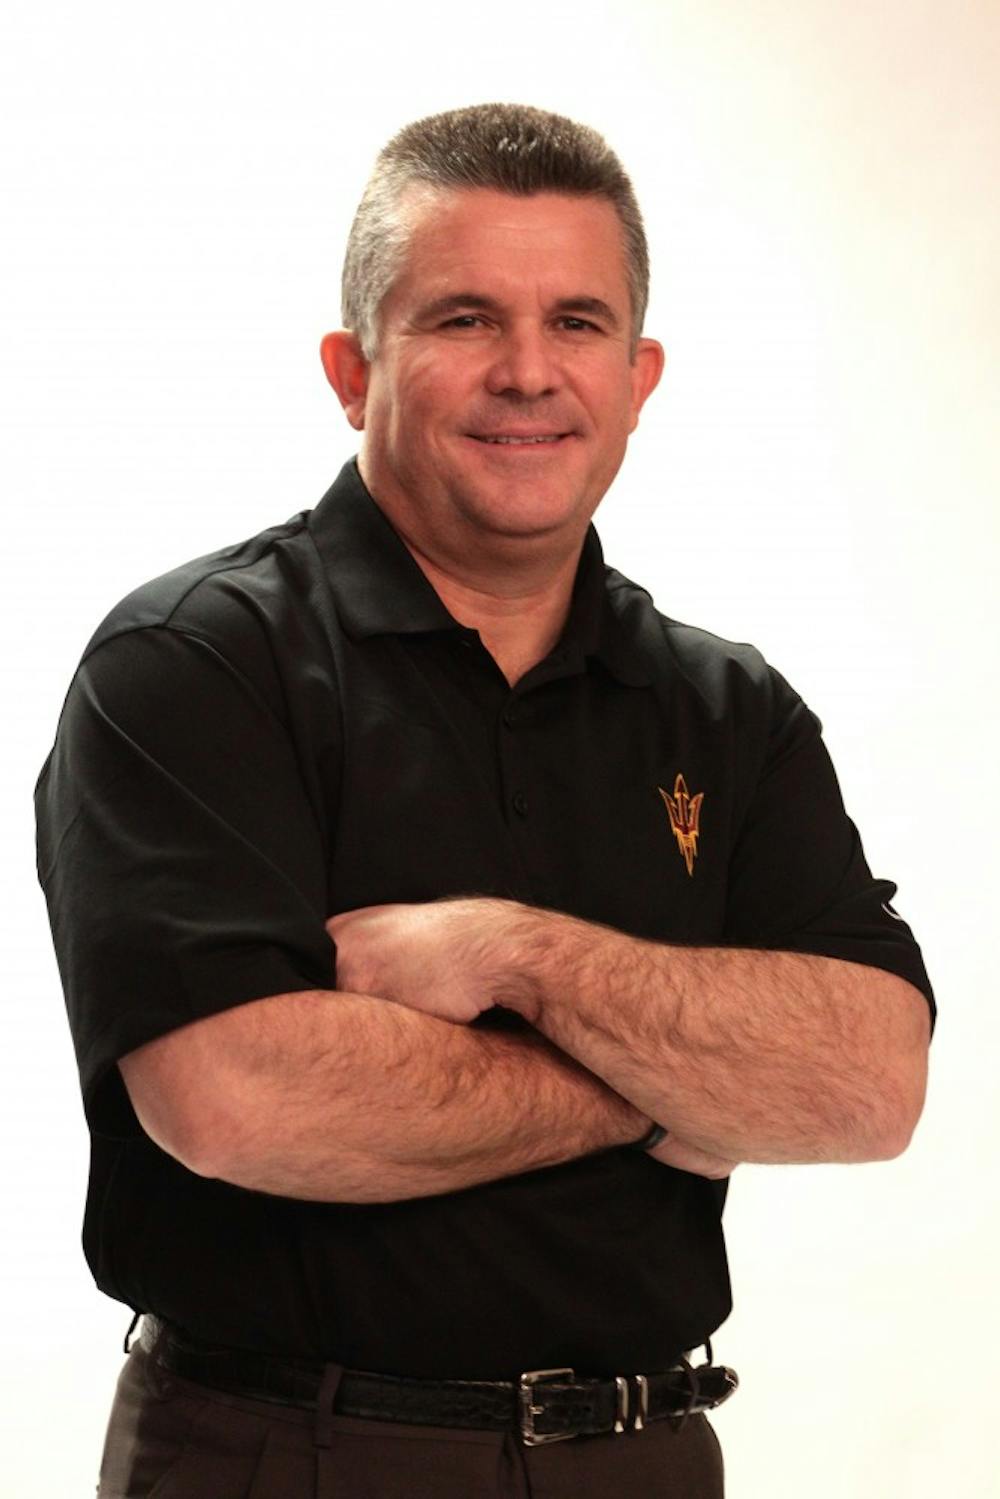 Todd Graham (Photo by Beth Easterbrook)